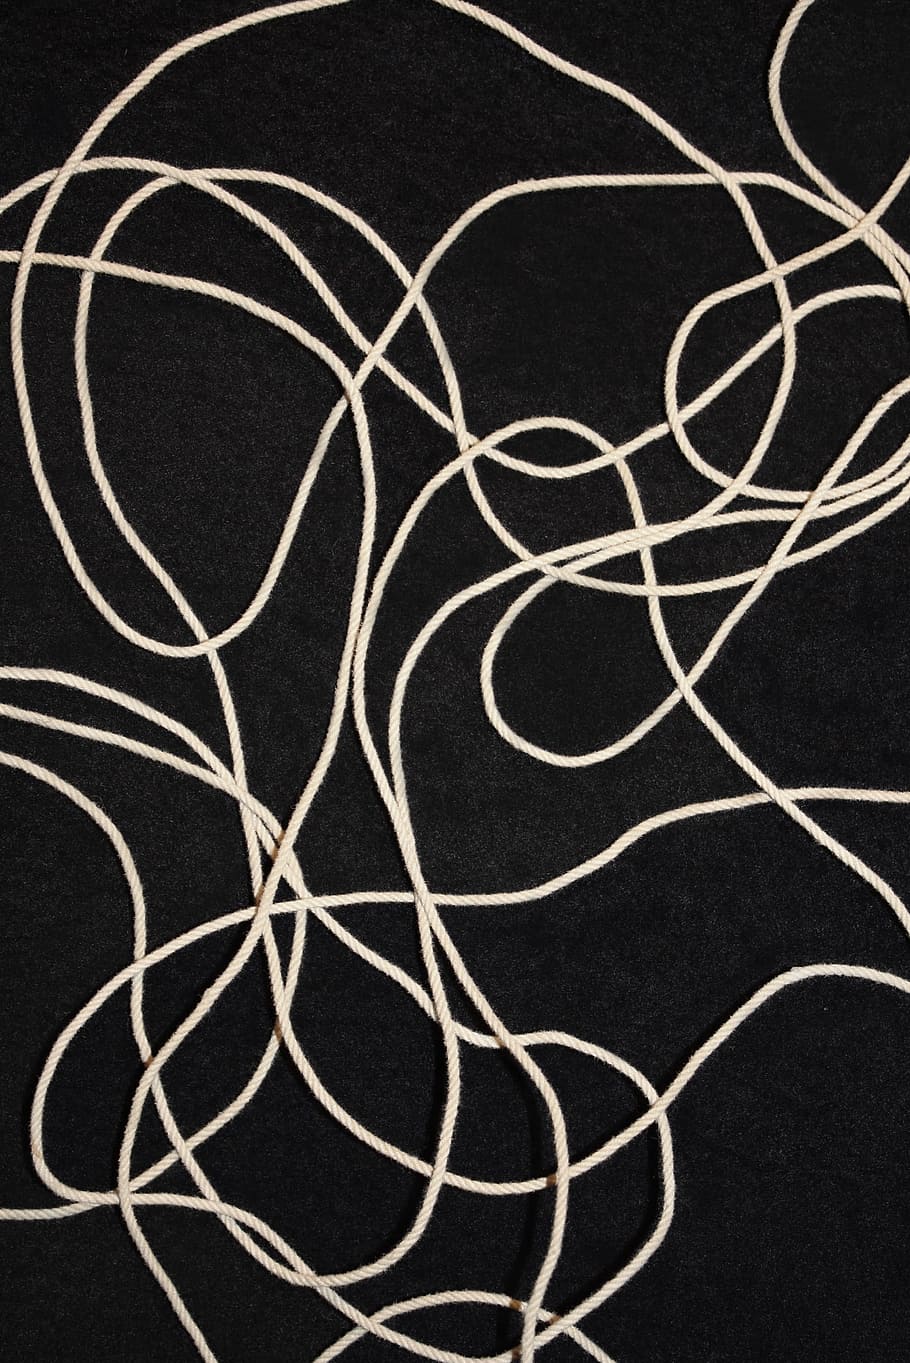 String, Tangled, Mess, tangled string, white string, connection, backgrounds, communication, close-up, arts culture and entertainment